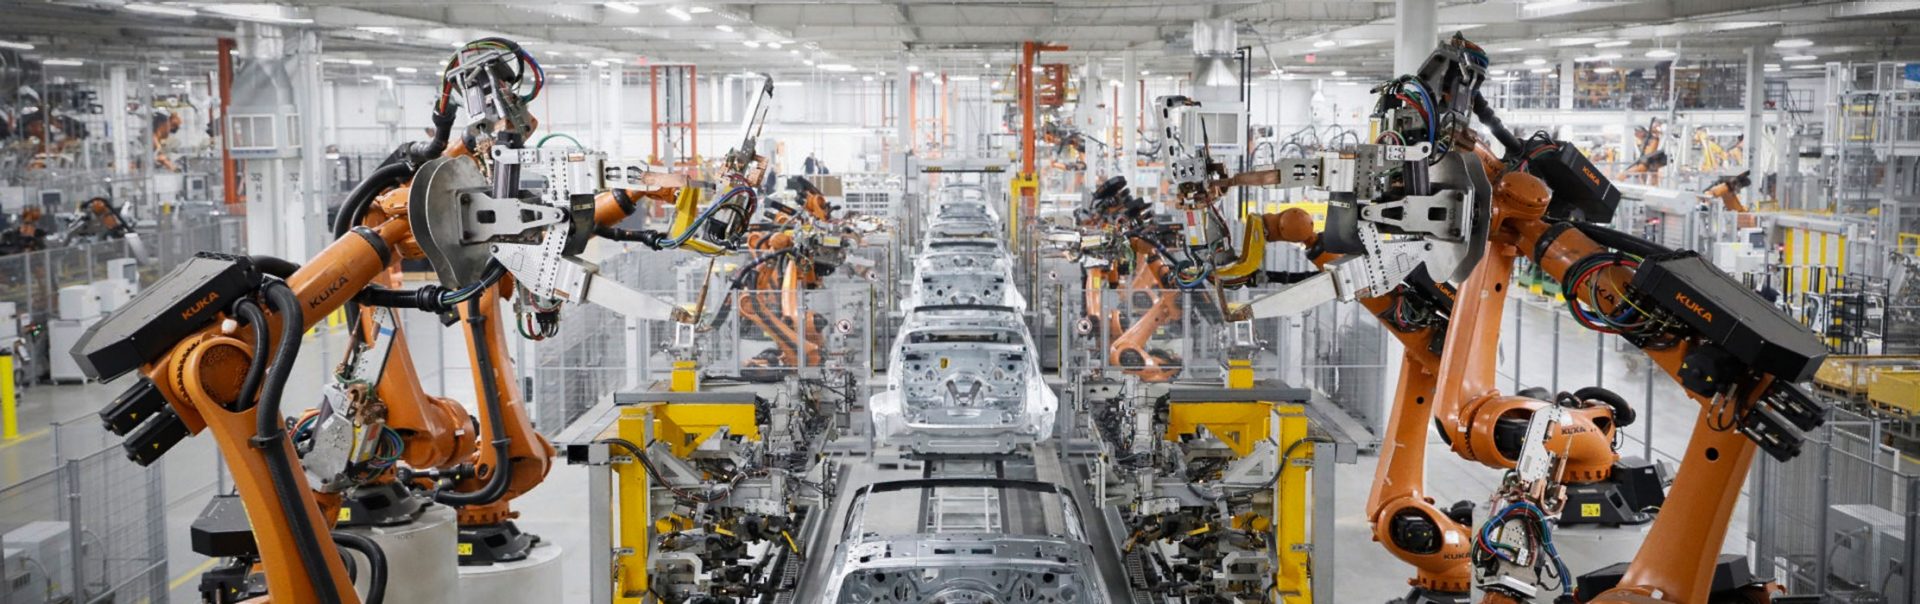 The picture shows a production line at a BMW factory.